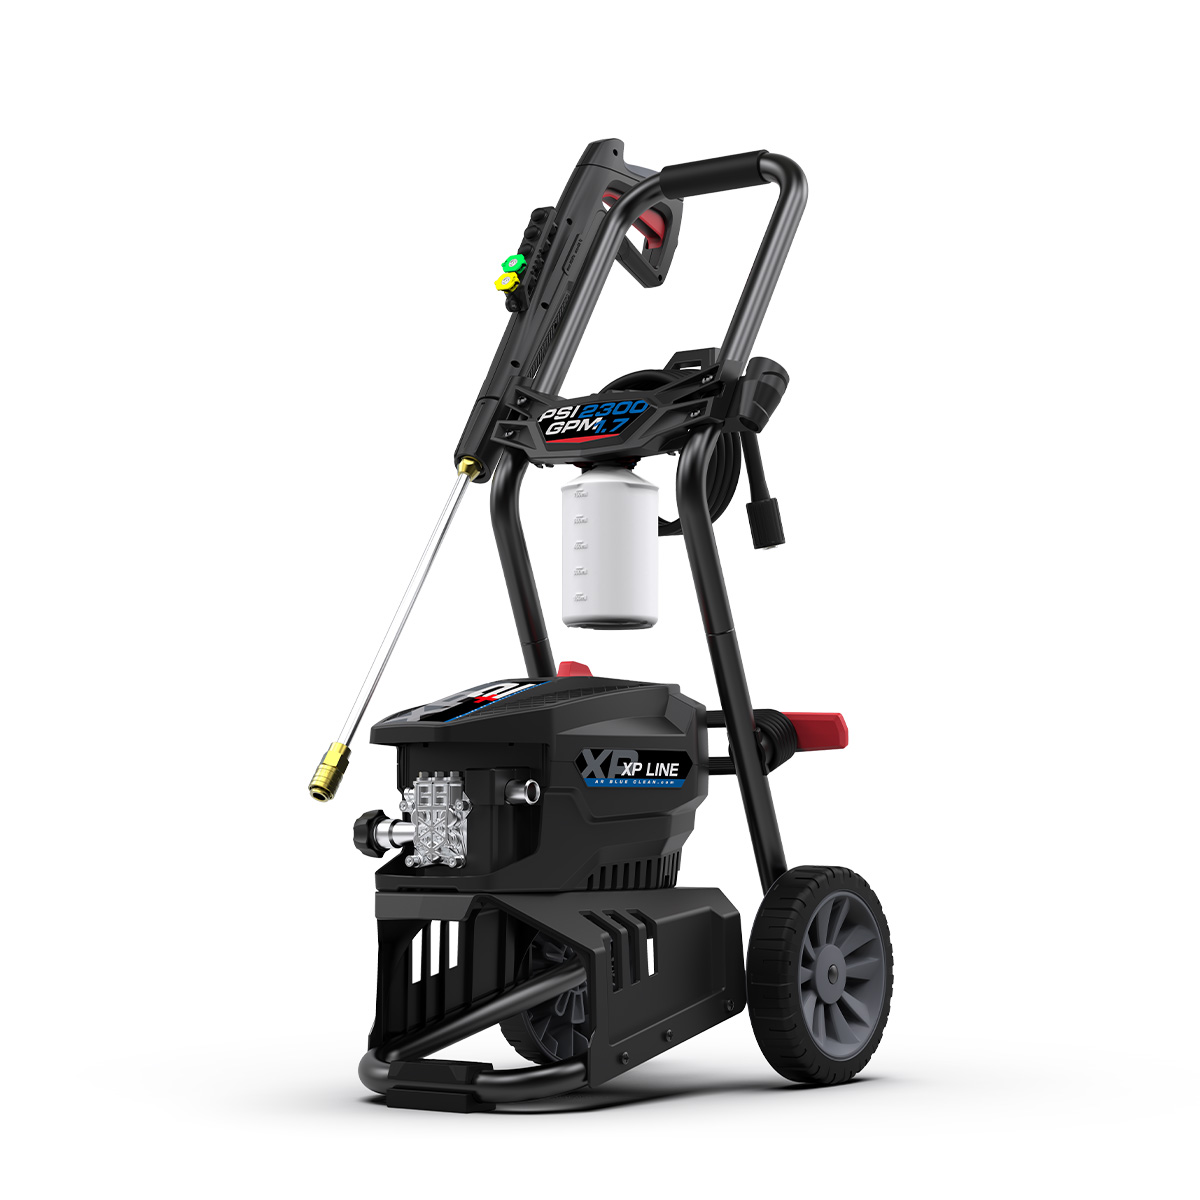 AR Blue Clean XP2 2300P, 2300 PSI, 1.7 gpm, 13 amp Electric Pressure Washer Questions & Answers